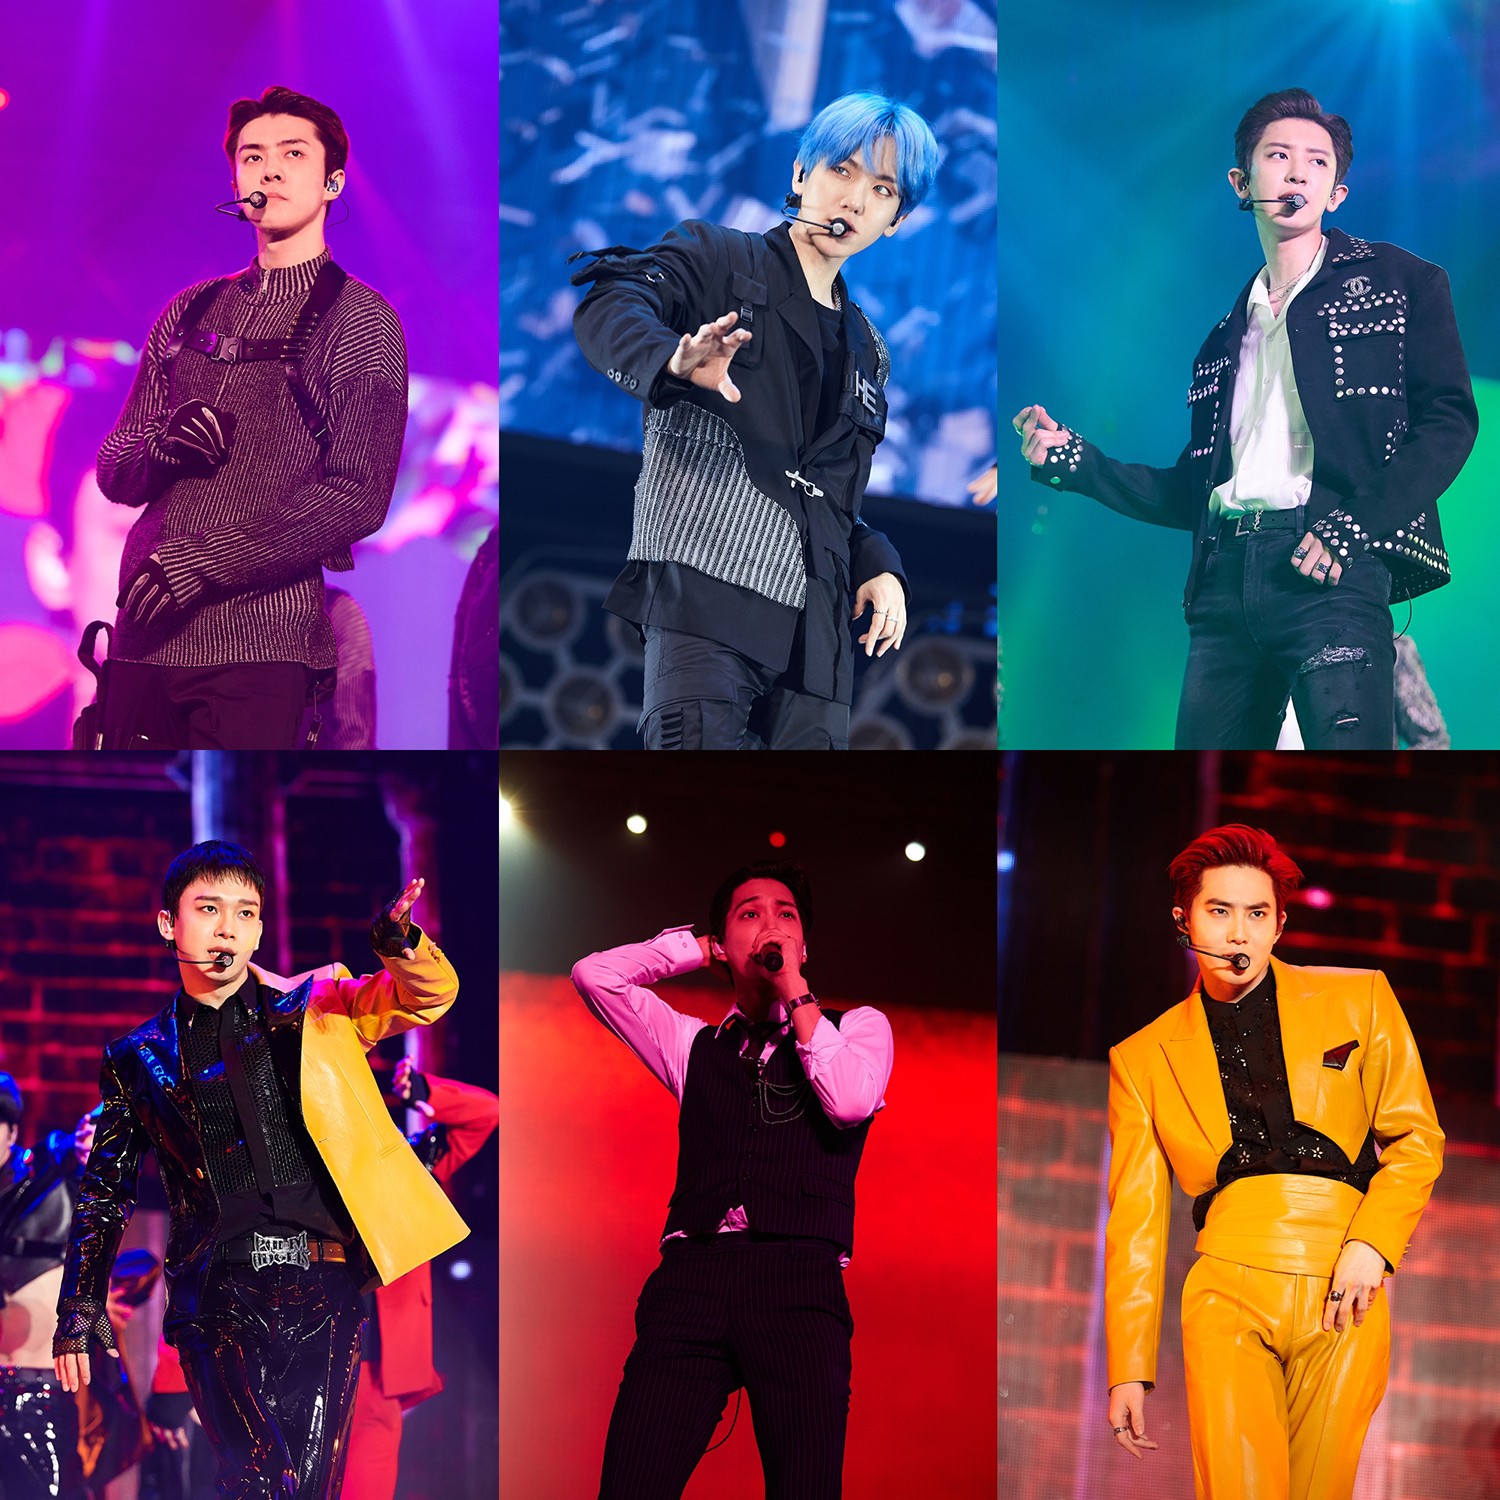 The group EXO successfully completed the Seoul Walk the Line concert.EXO was enthusiastic about the audience with its powerful performances, colorful music and stage production at EXO Planet #5 - Exploration [dot] - (EXO PLANET #5 - EXpLOration [dot] - ) held at the Seoul Olympic Park KSPO DOME for three days from 29th to 31st last month.On the last day of the performance, on the 31st of last month, it was broadcast live around the world through Naver V-VIVE +, which received a hot response.In this performance, EXO has released songs from winter albums such as Regular 5 albums and repackaged songs such as Tempo, Love Shot, Damage, 24/7, First Eye, Standard including hit songs such as Run, Addiction, Call Me Baby, Monster and Power.In addition, he presented 27 songs of variety to the stage of Sehun & Chanyeol unit such as Chens Miracle of December, Kais Confession, Spoiler, Baek Hyuns UN Village, Suhos Ill Go and so on.EXO has newly prepared the new Regular 6th album stage released last November for the Walk the Line performance.The title song Obsession, which is a dark charisma stand out, as well as the stage of songs such as Non Stop, Jekyll, Butterfly Effect, and Today, caught the attention.It also has a lot of fun to show sensual images that can meet EXO and X-EXO concepts at the same time.This concert was a Walk the Line performance of EXOs 5th solo concert and a finale performance, which sold out all three performances and mobilized a total of 45,000 viewers.The audience enthusiastically enjoyed the performance by wearing the dress codes every time in the colors that symbolize EXOs winter albums such as Red & Green, Black & Gray & White, and Brown & White.Slogan, large card section and other events were also held to impress the members.